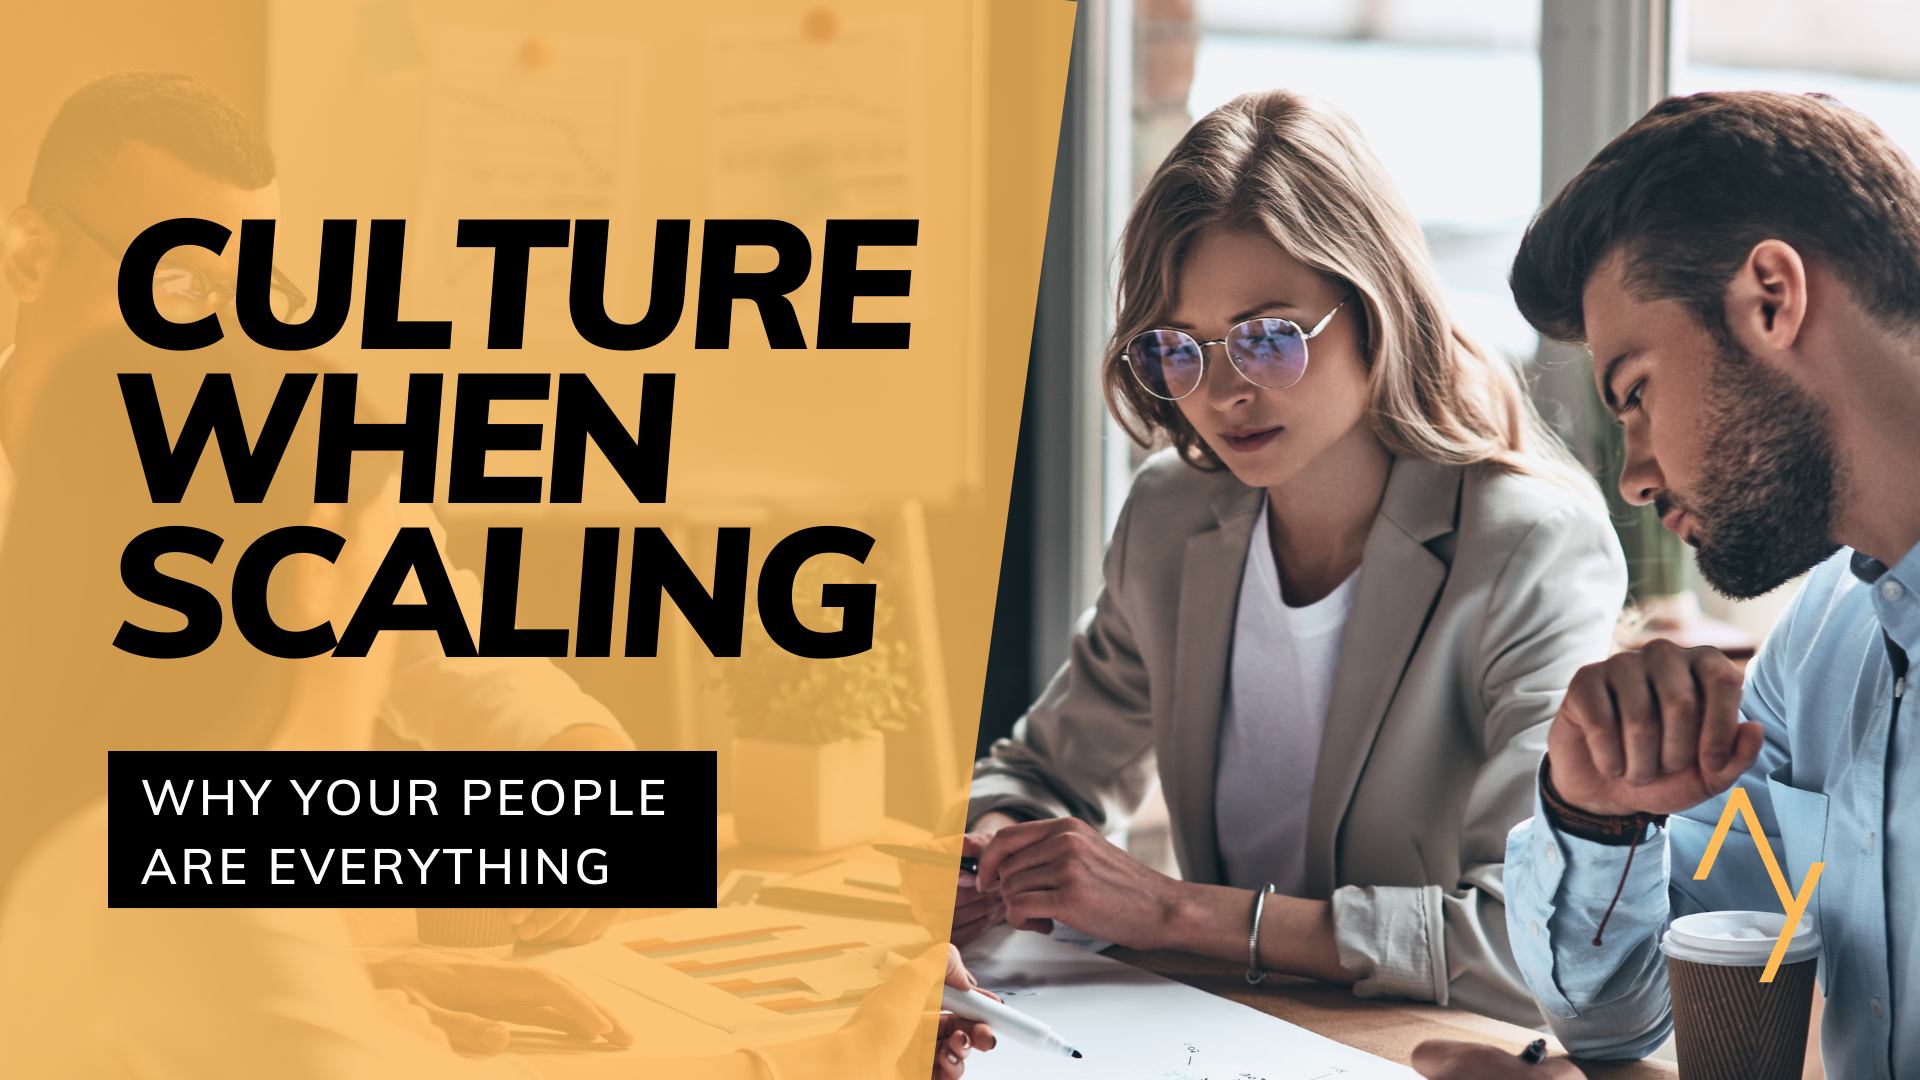 Why Your Culture and People Are So Important When Scaling A Business